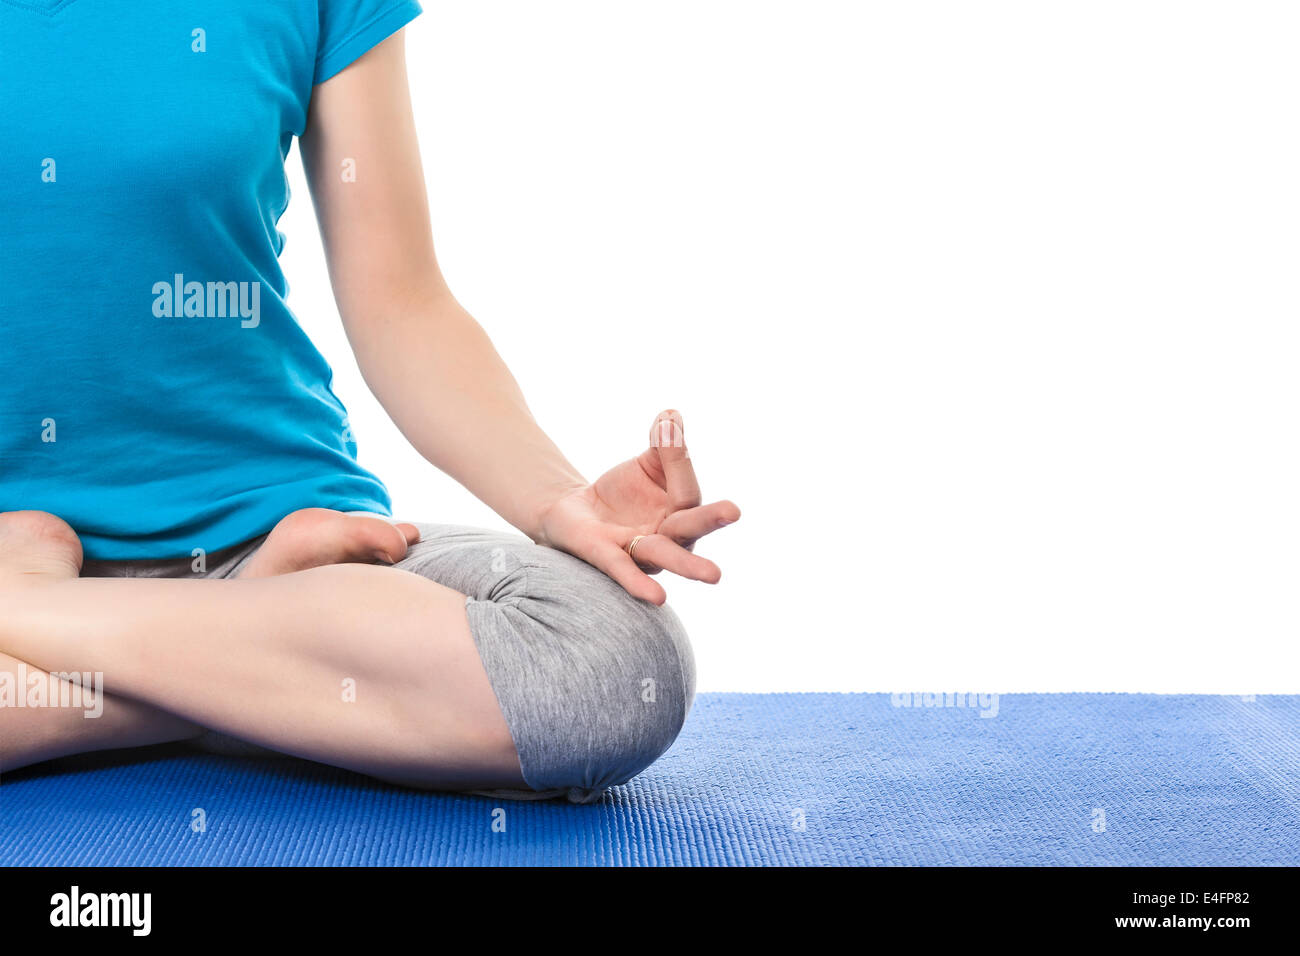 Close up of yoga Padmasana (Lotus pose) cross legged position for meditation with Chin Mudra - psychic gesture of consciousness Stock Photo